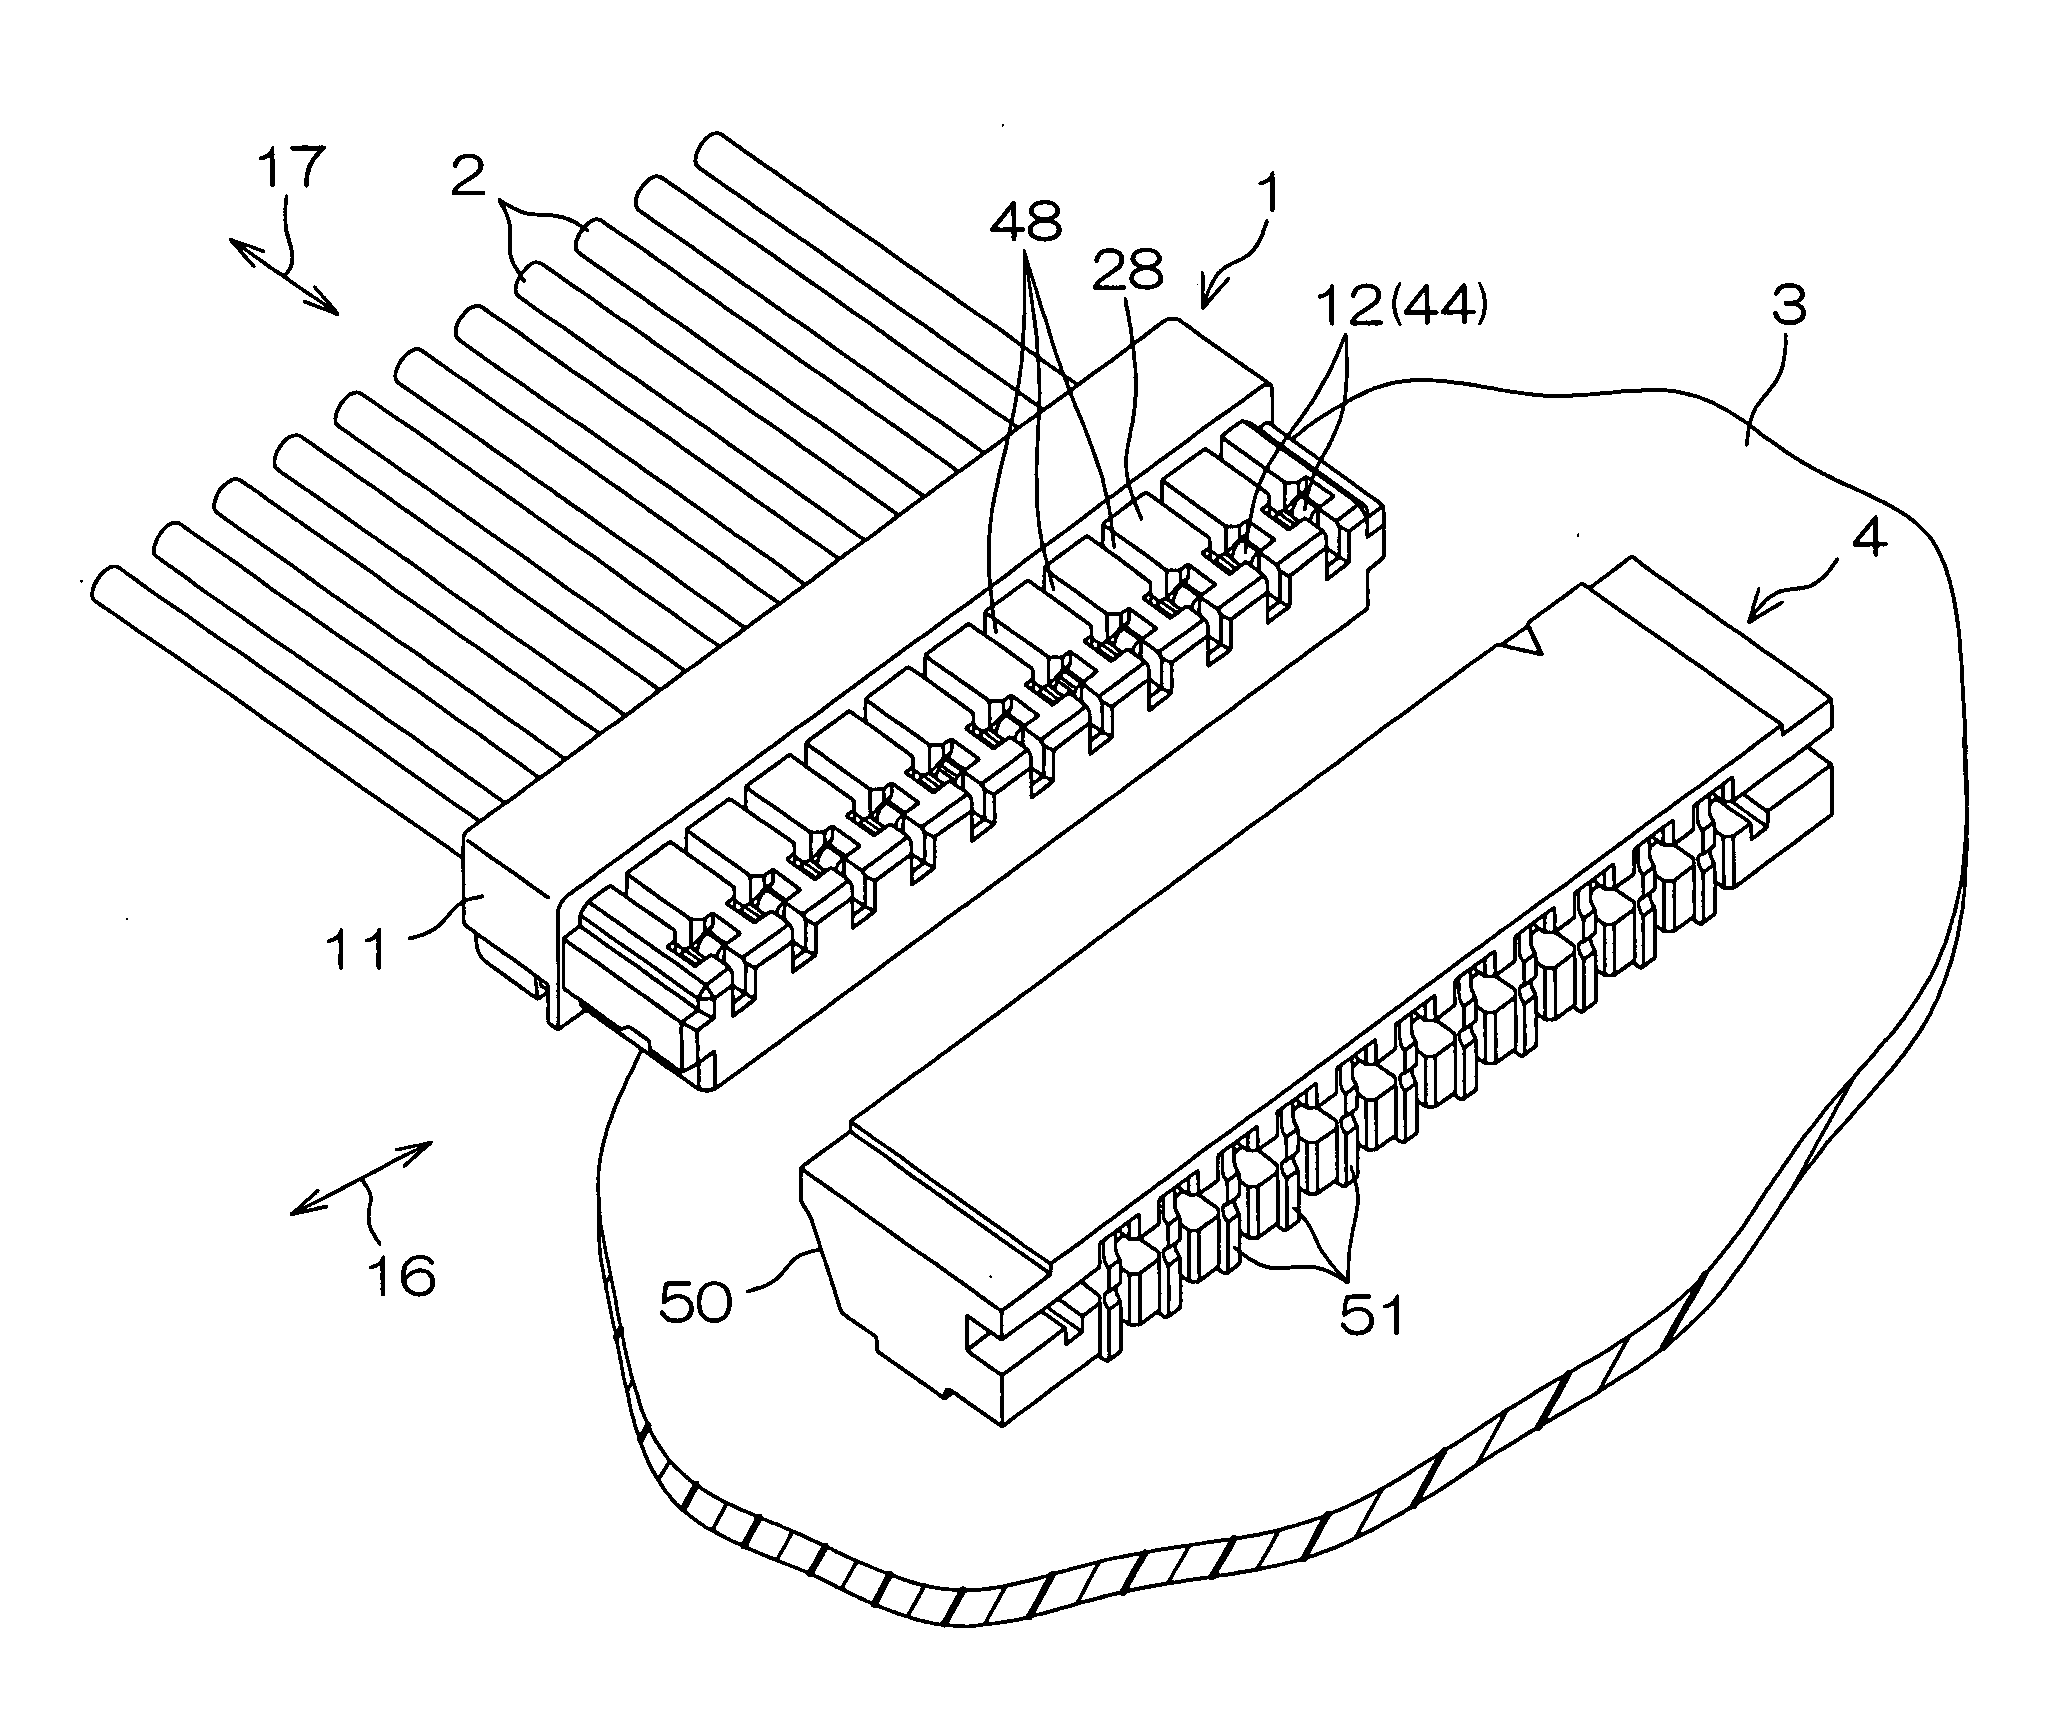 Insulation displacement contact and electric connector using the same